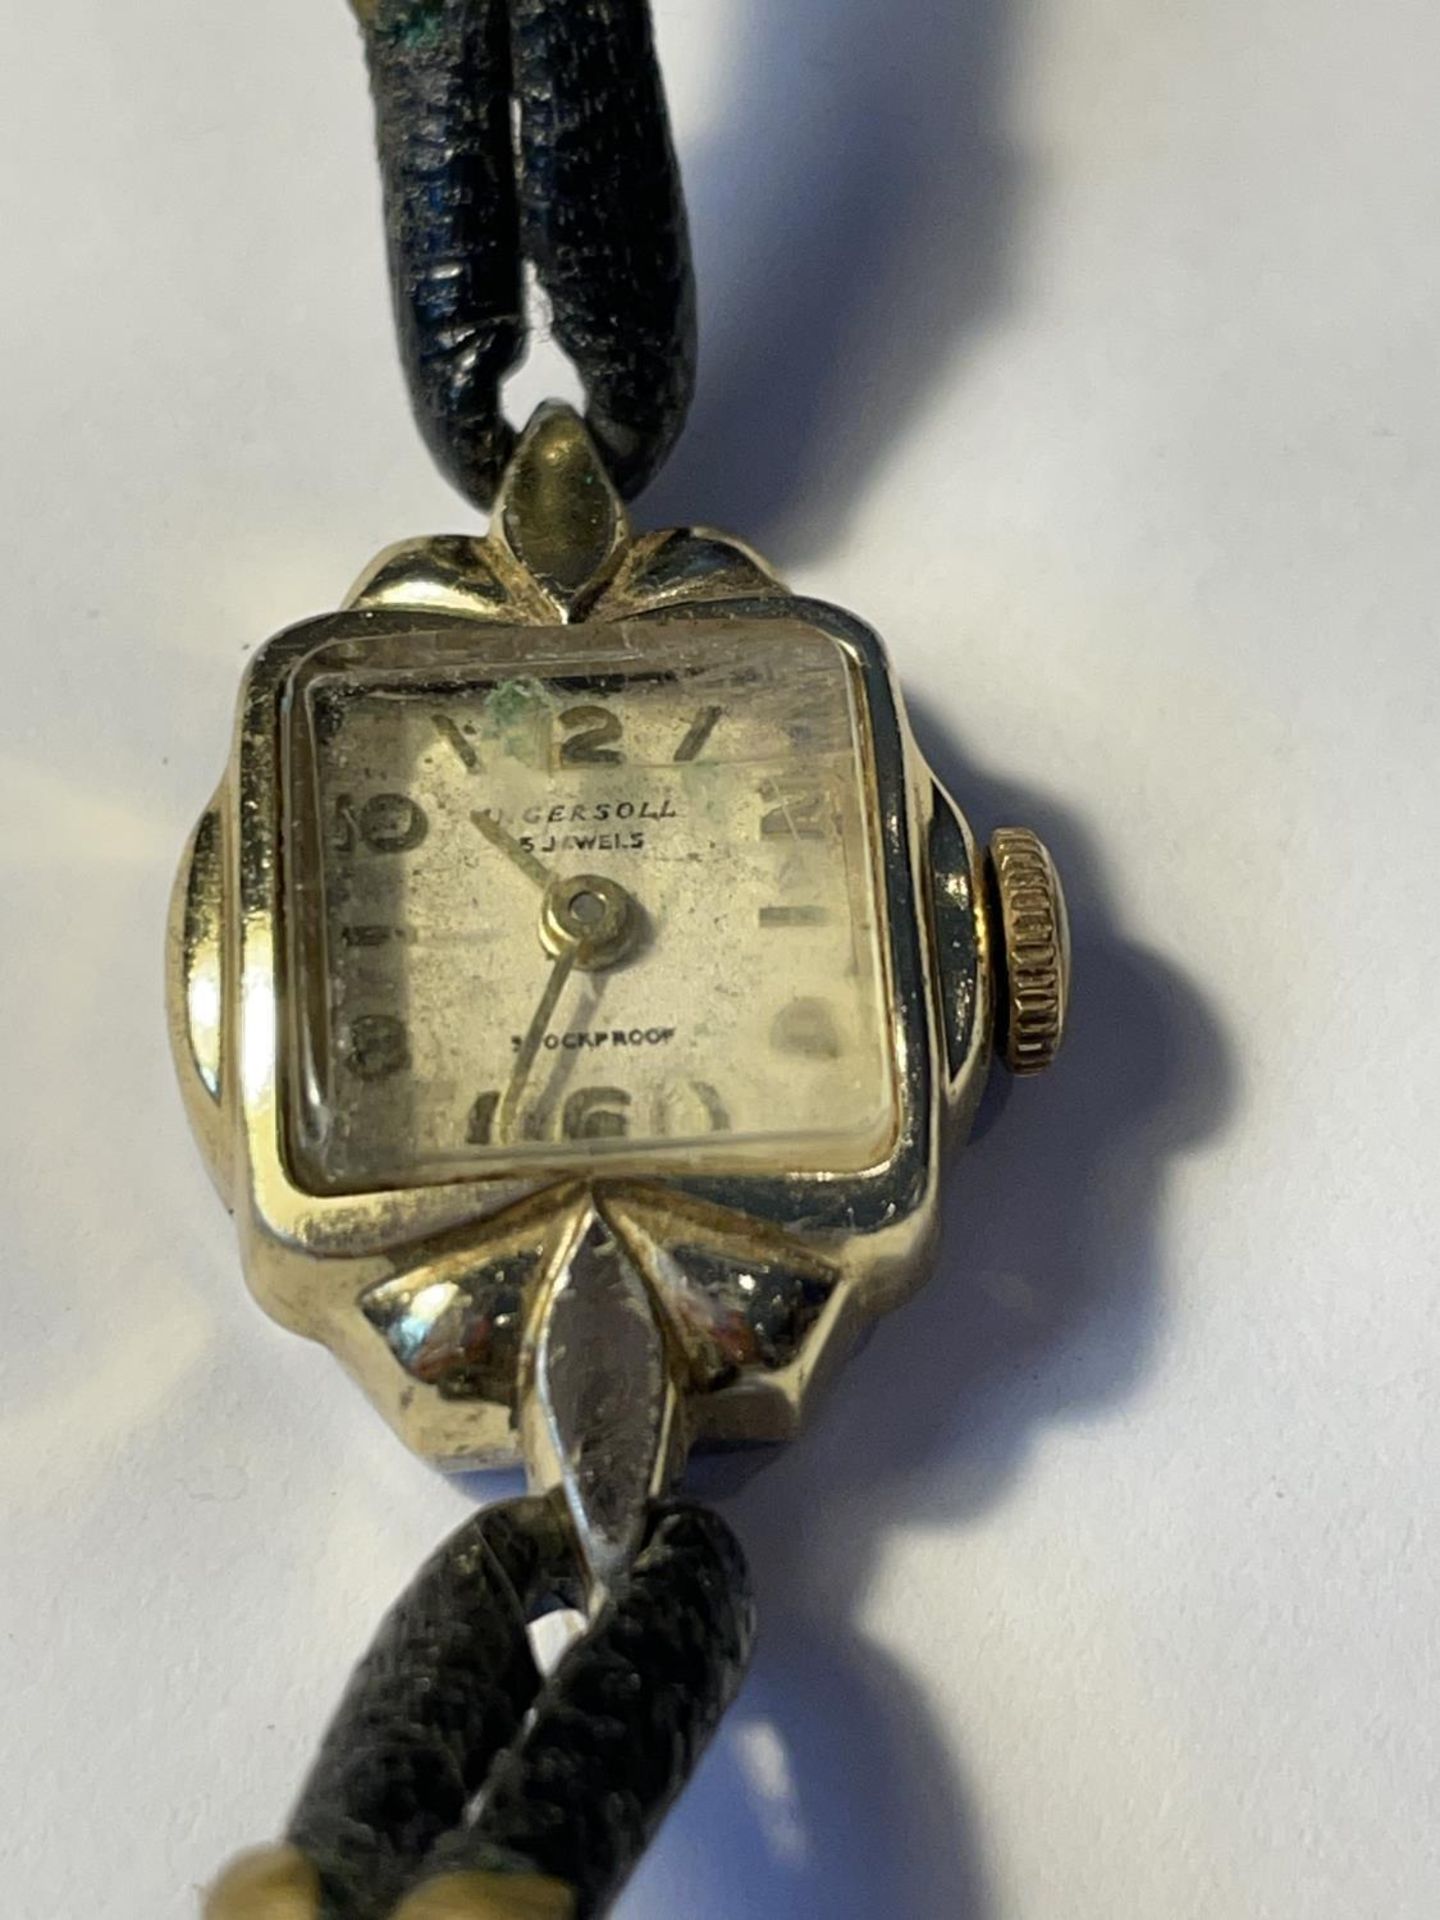 A VINTAGE INGERSOL 15 JEWEL WATCH WITH SQUARE FACE AND LEATHER STRAP - Image 2 of 3